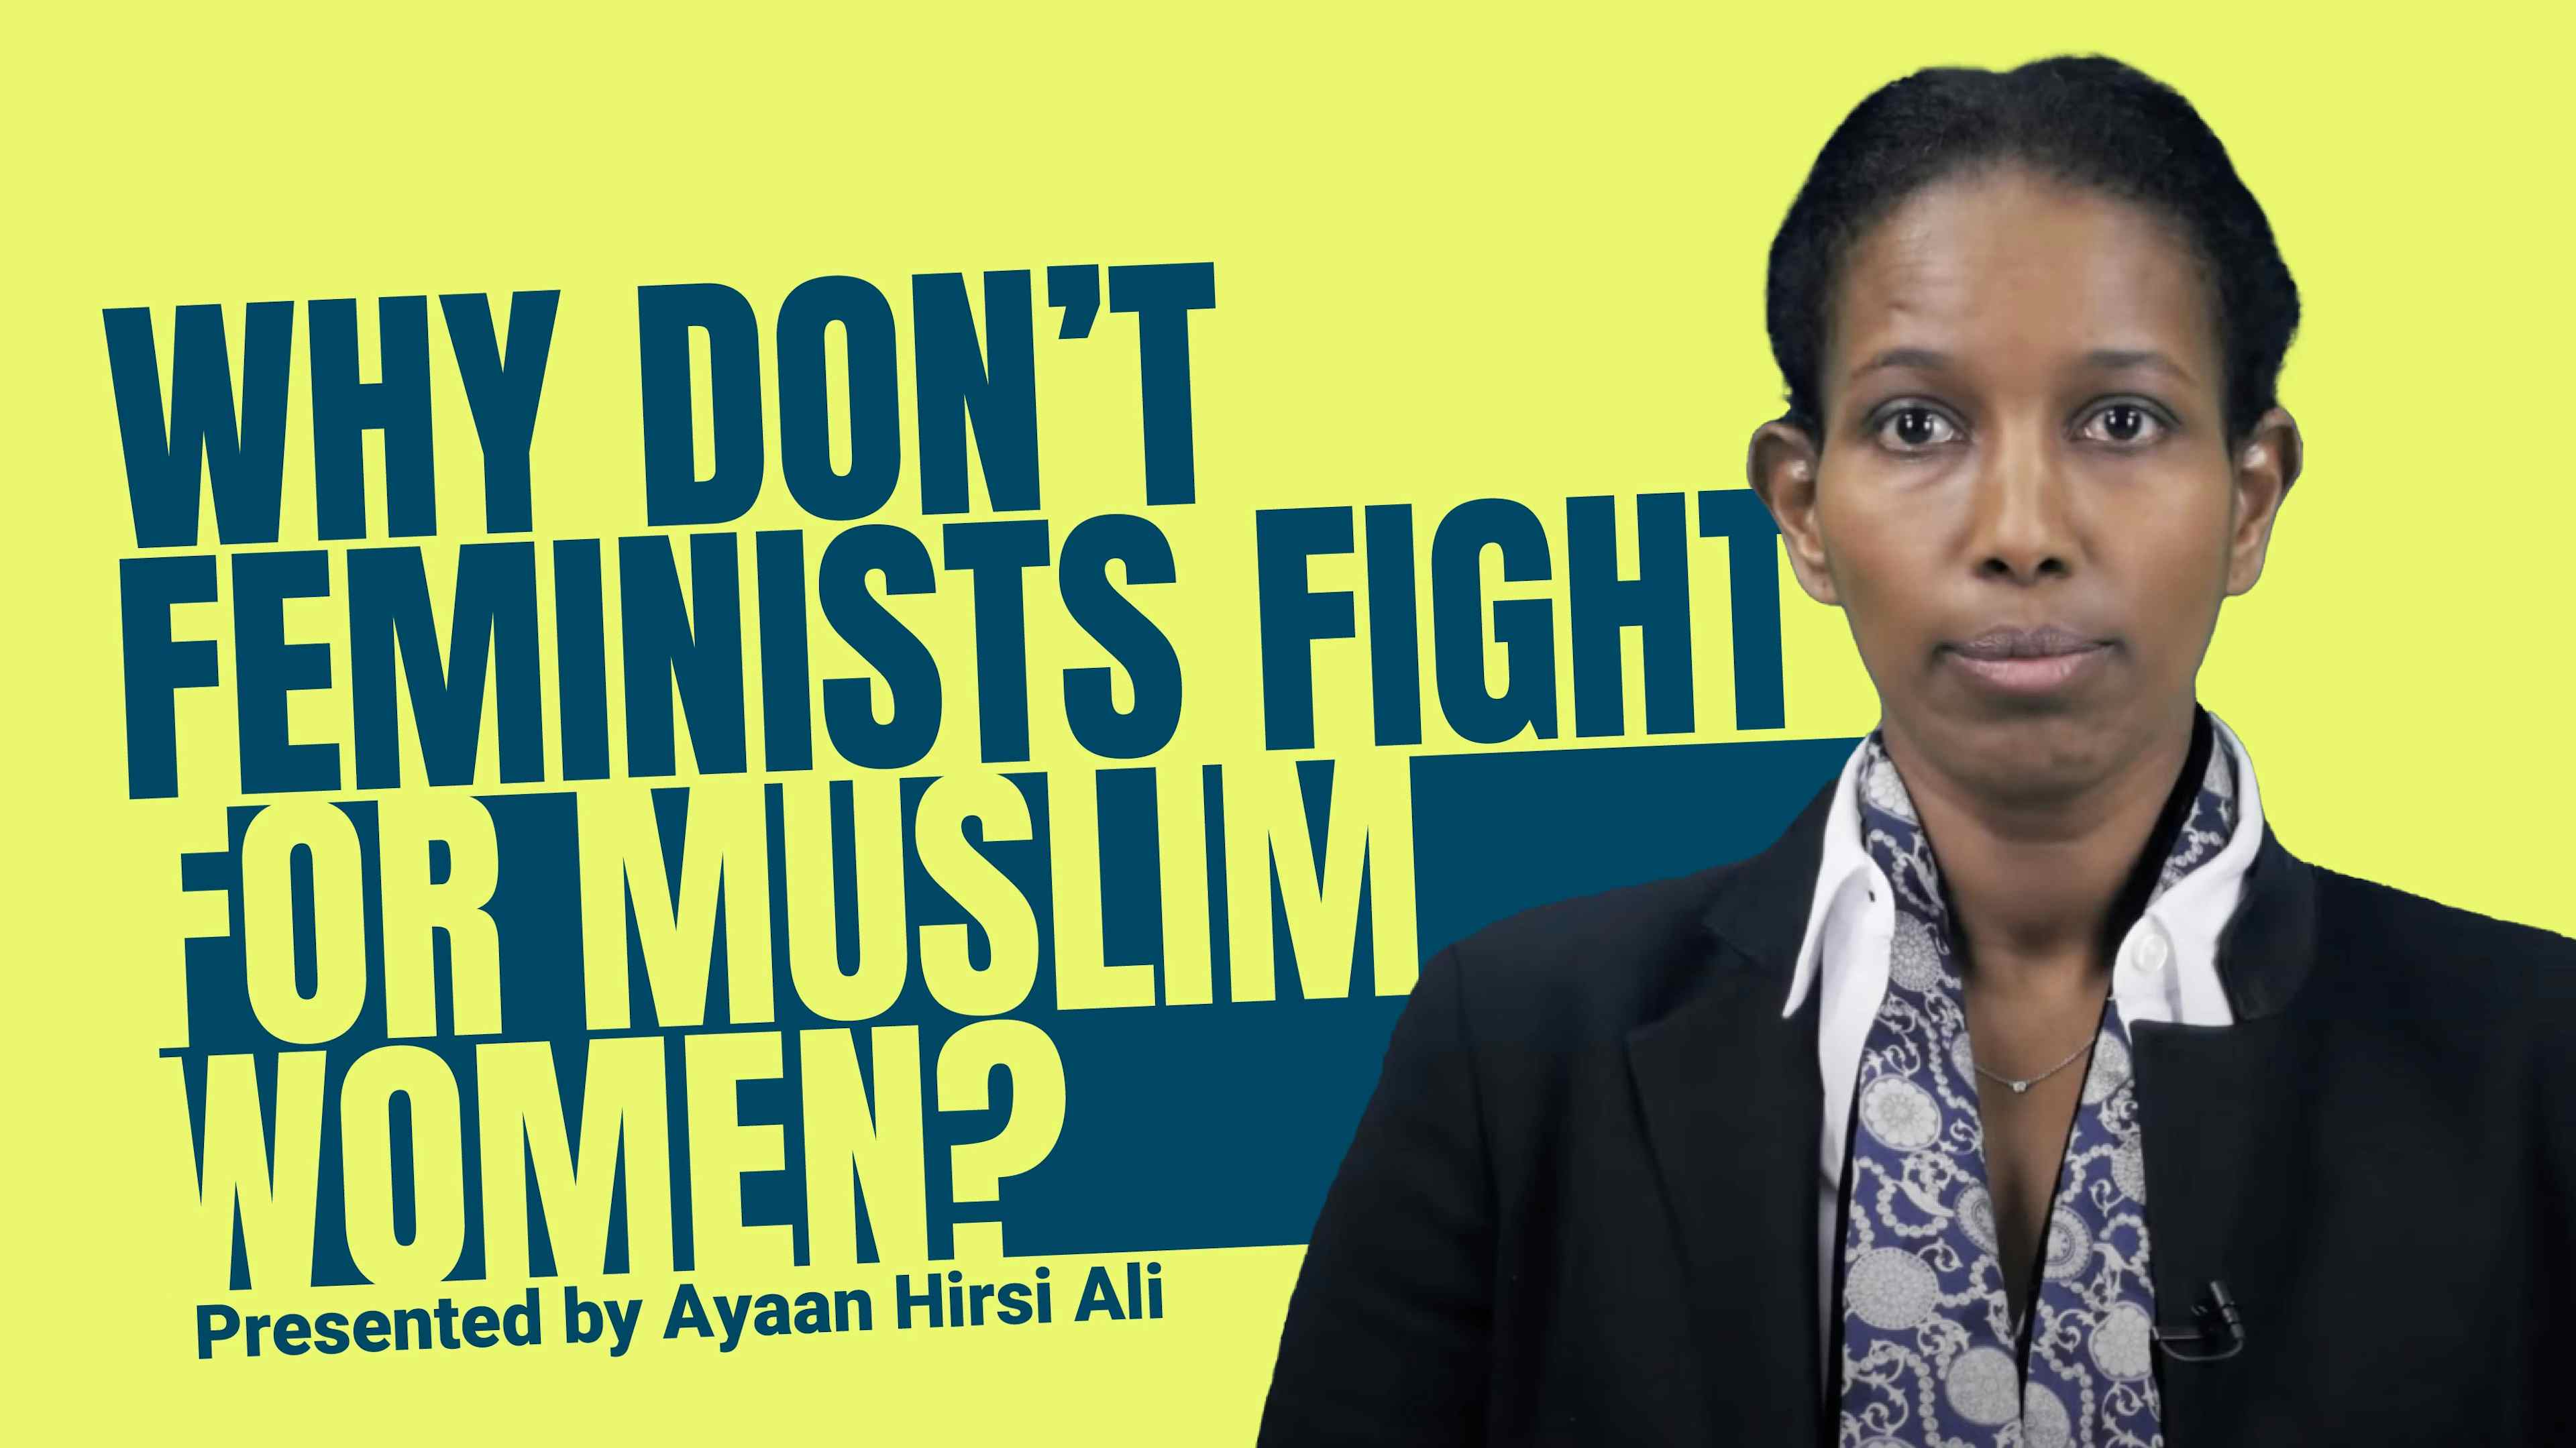 Why Don't Feminists Fight for Muslim Women?